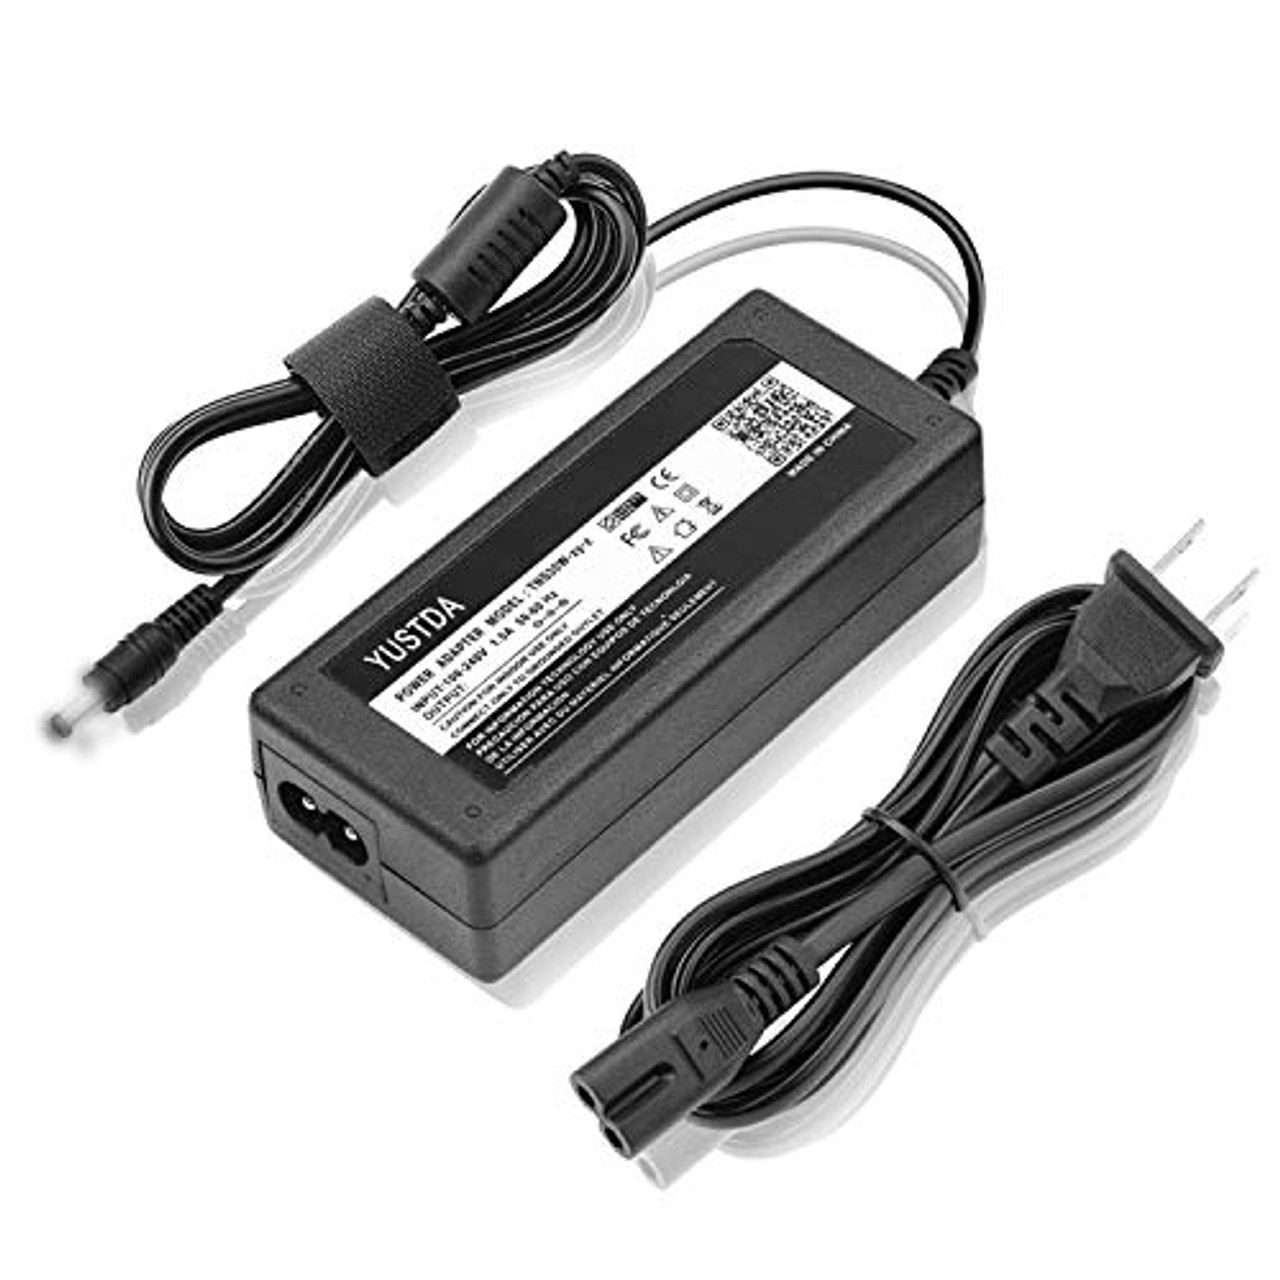 AC ADAPTER POWER CHARGER SUPPLY CORD I.T.E AMDD-30170-230A AMDD-30170-2300 